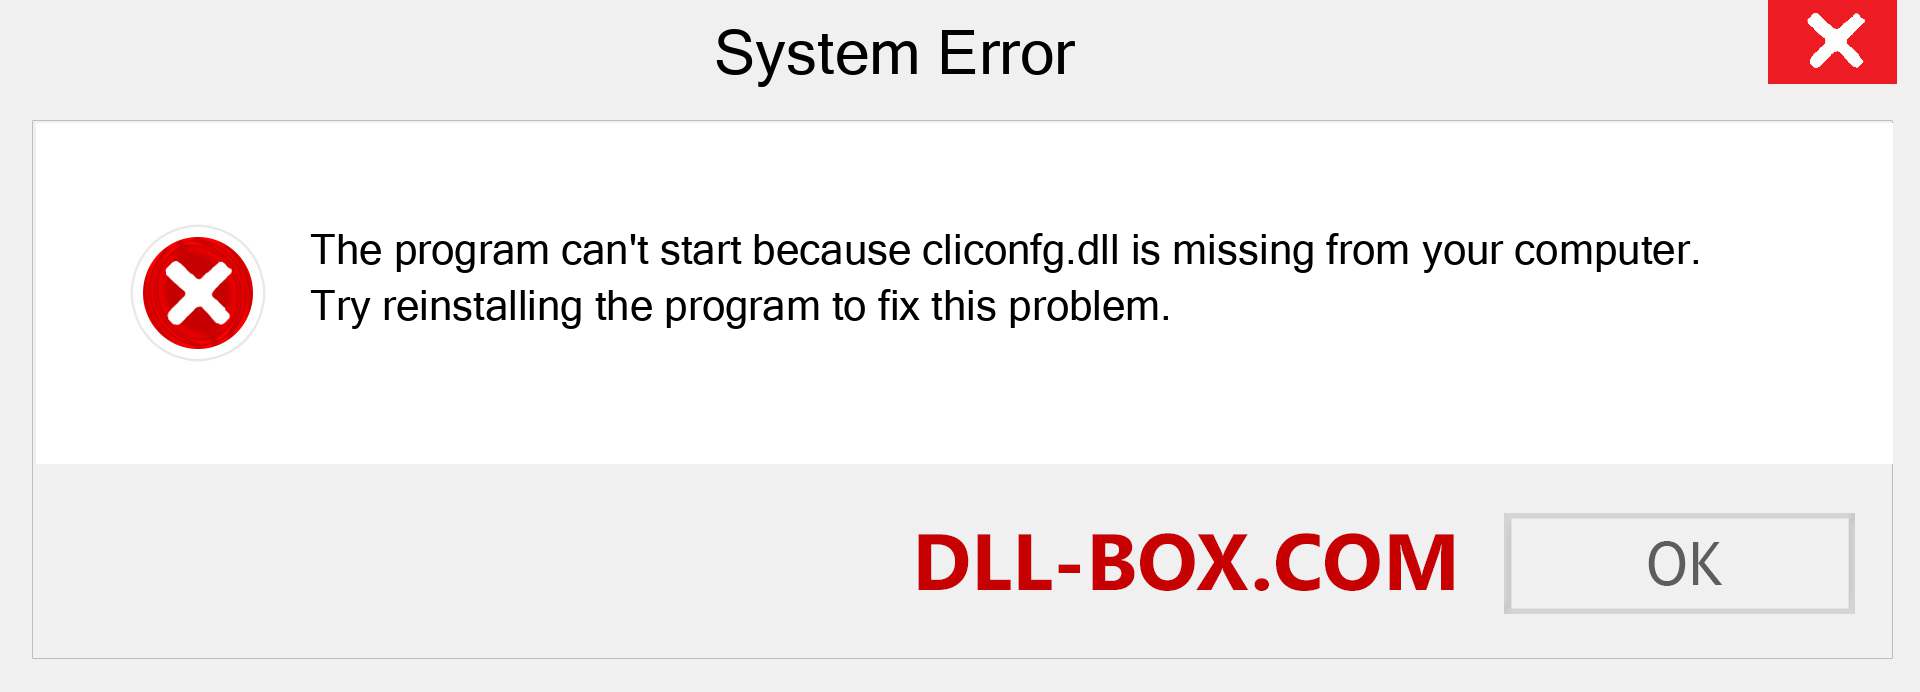  cliconfg.dll file is missing?. Download for Windows 7, 8, 10 - Fix  cliconfg dll Missing Error on Windows, photos, images